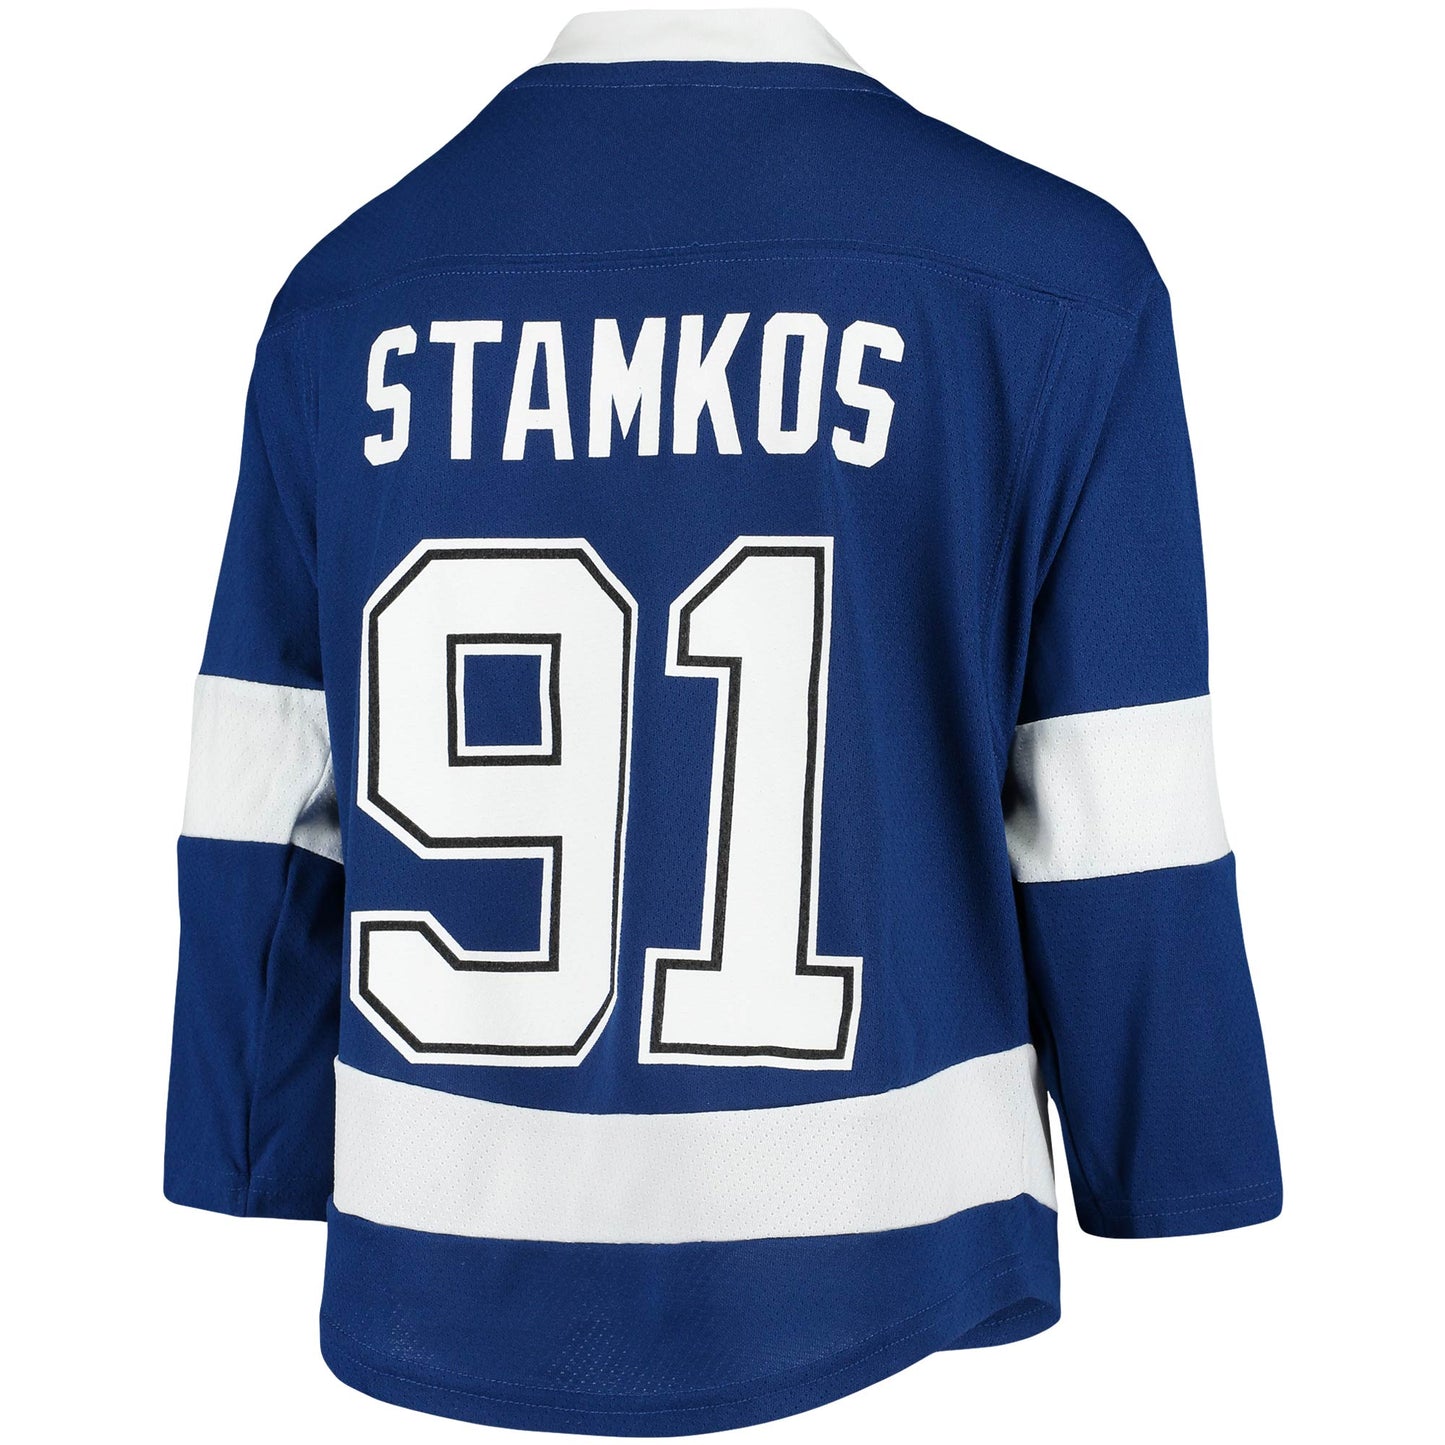 Steven Stamkos Tampa Bay Lightning Youth Home Replica Player Jersey - Blue